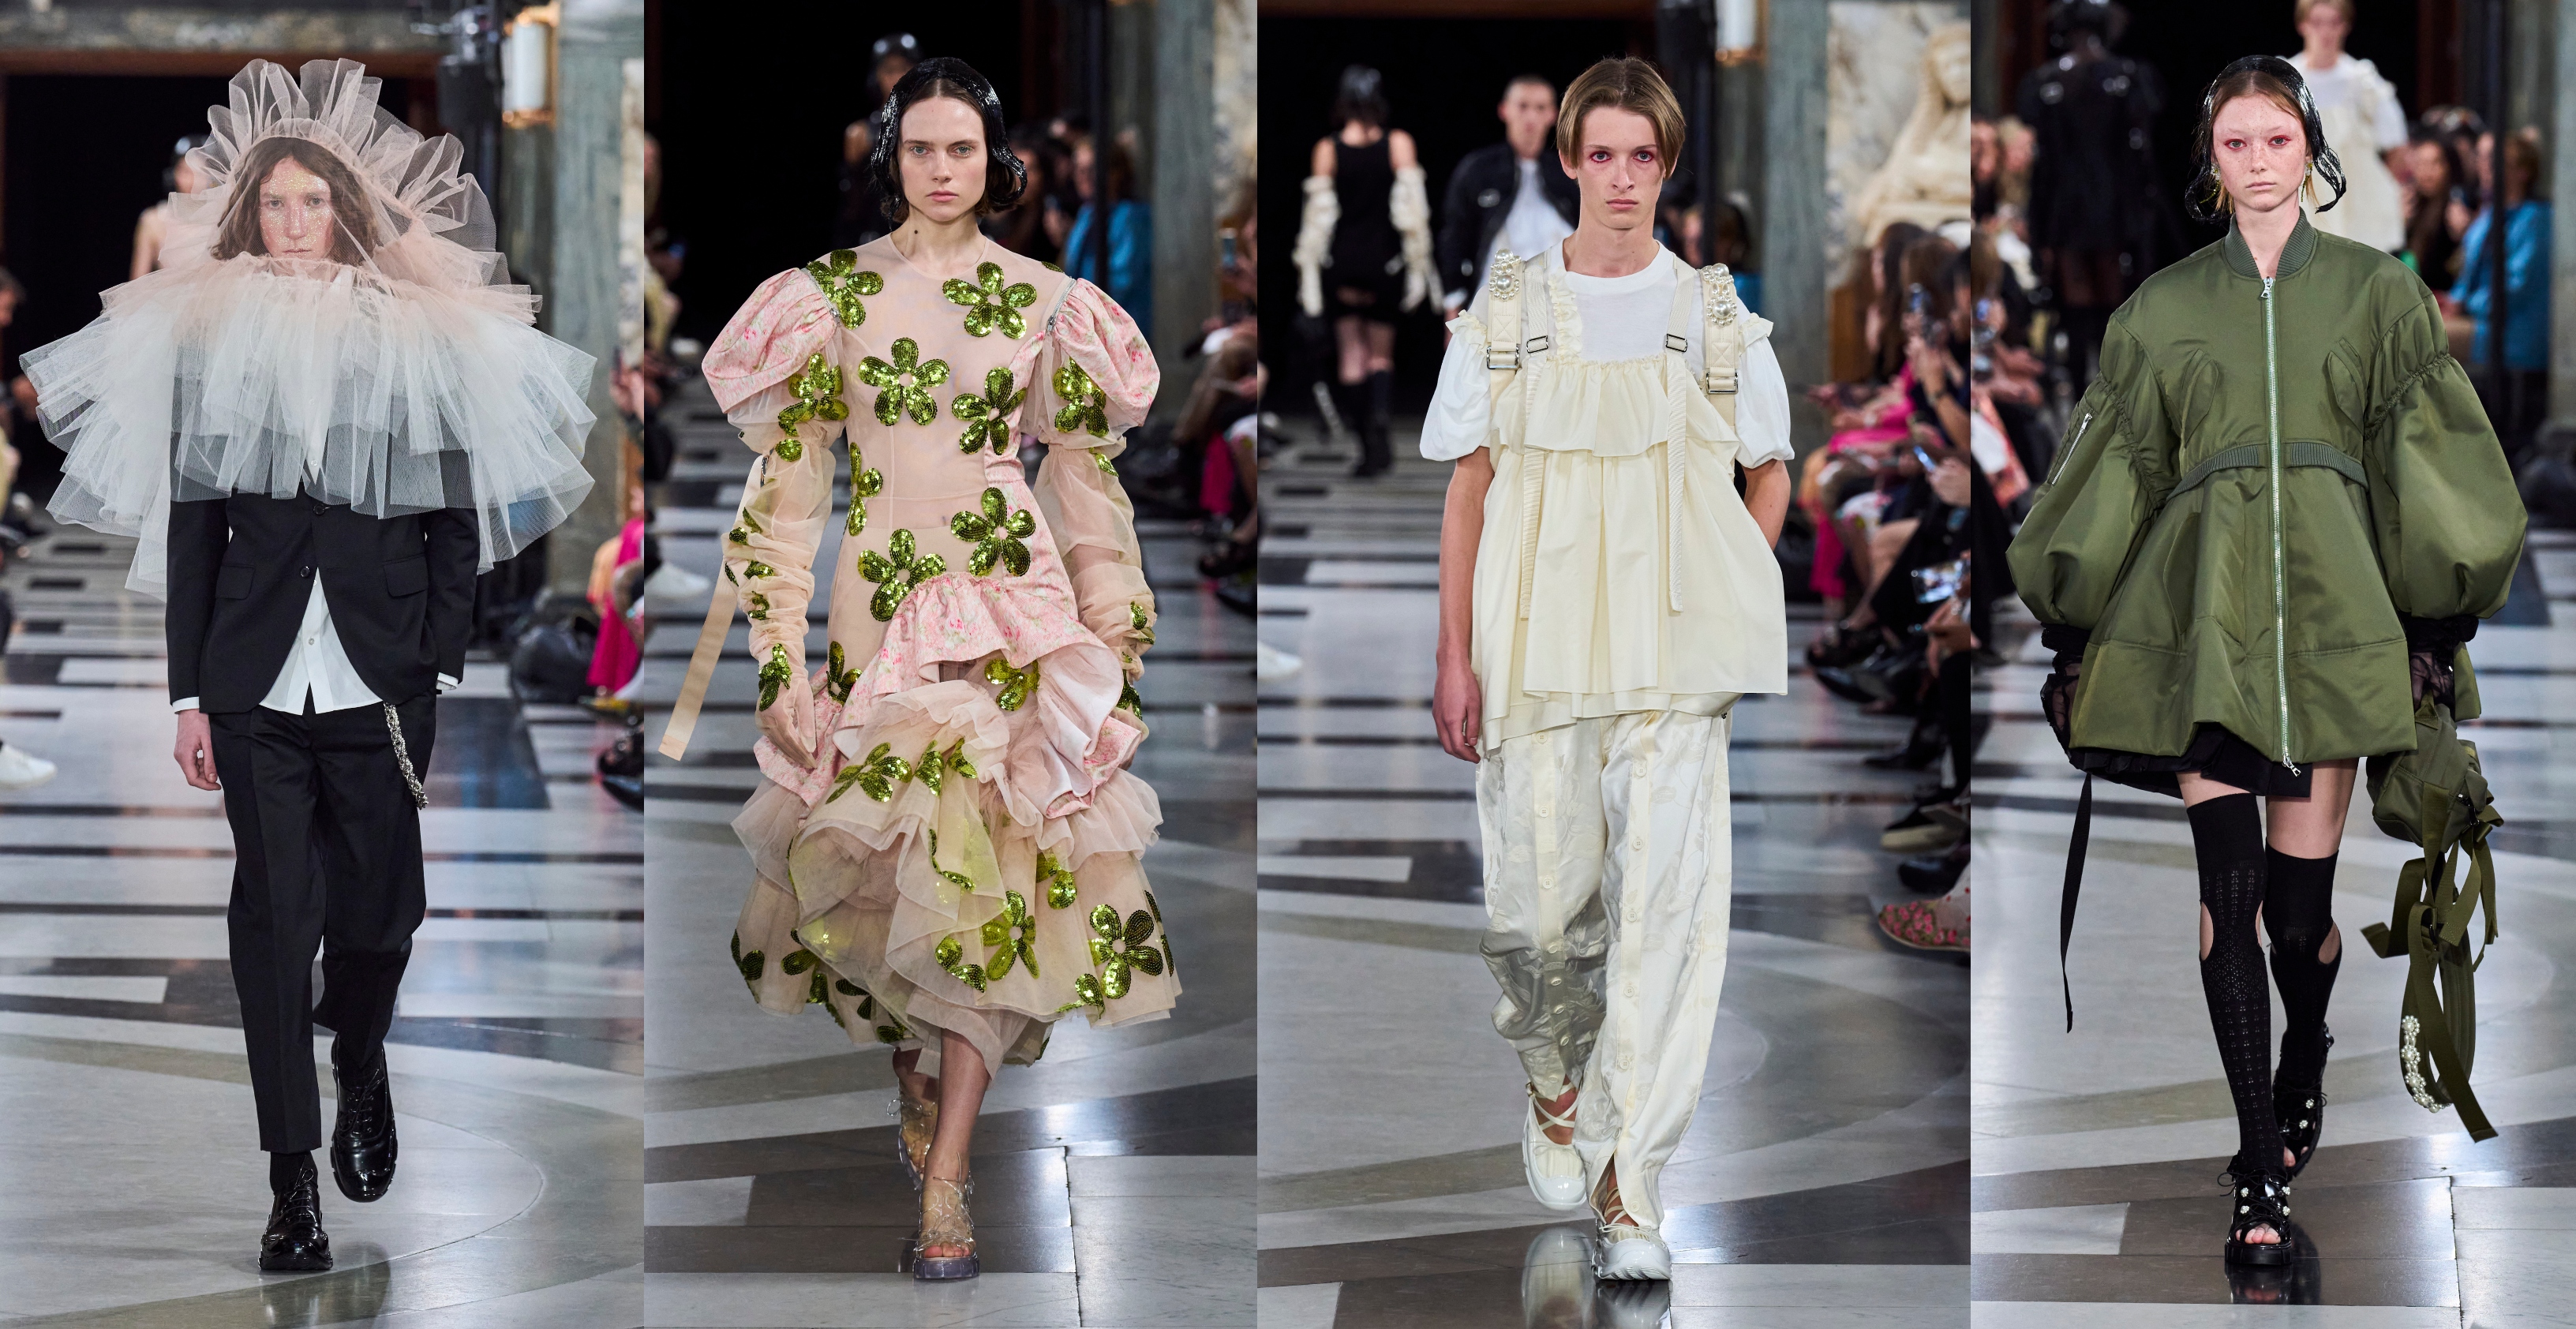 Spotted: Fashion designer and collector Simone Rocha with works by